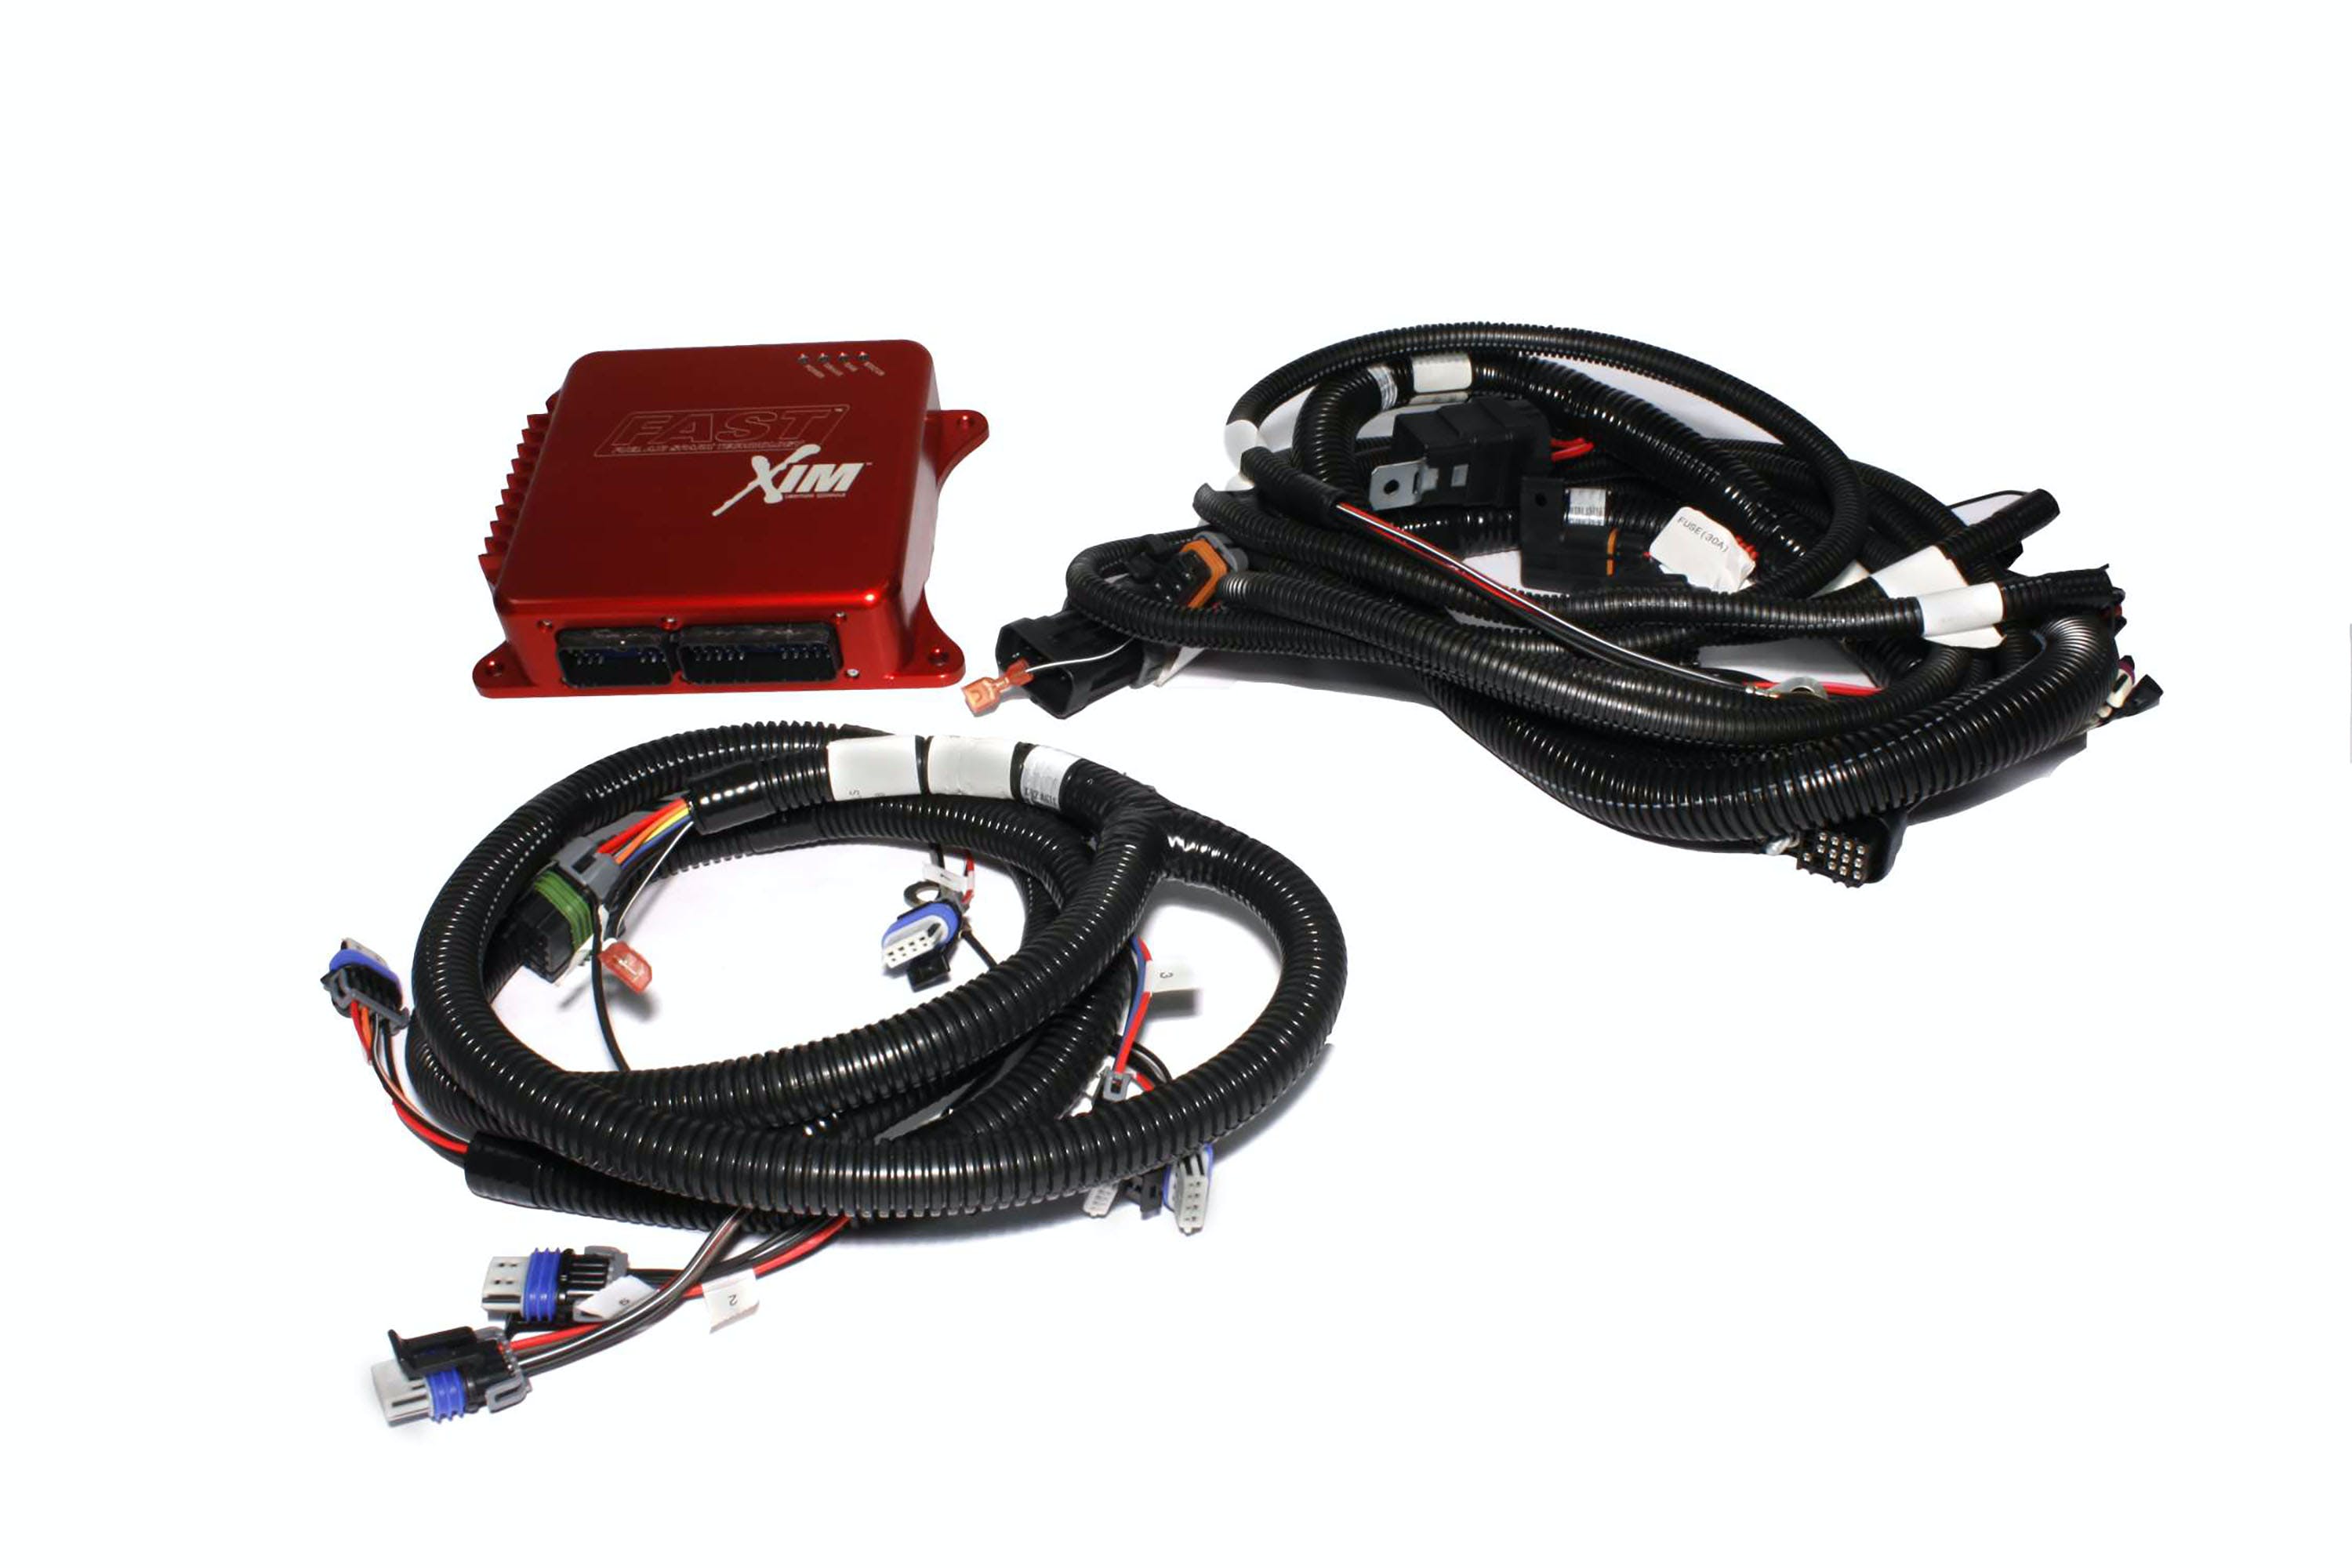 FAST - Fuel Air Spark Technology 301313A XIM Kit for Ford Modular Applications with LS series ignition coils.